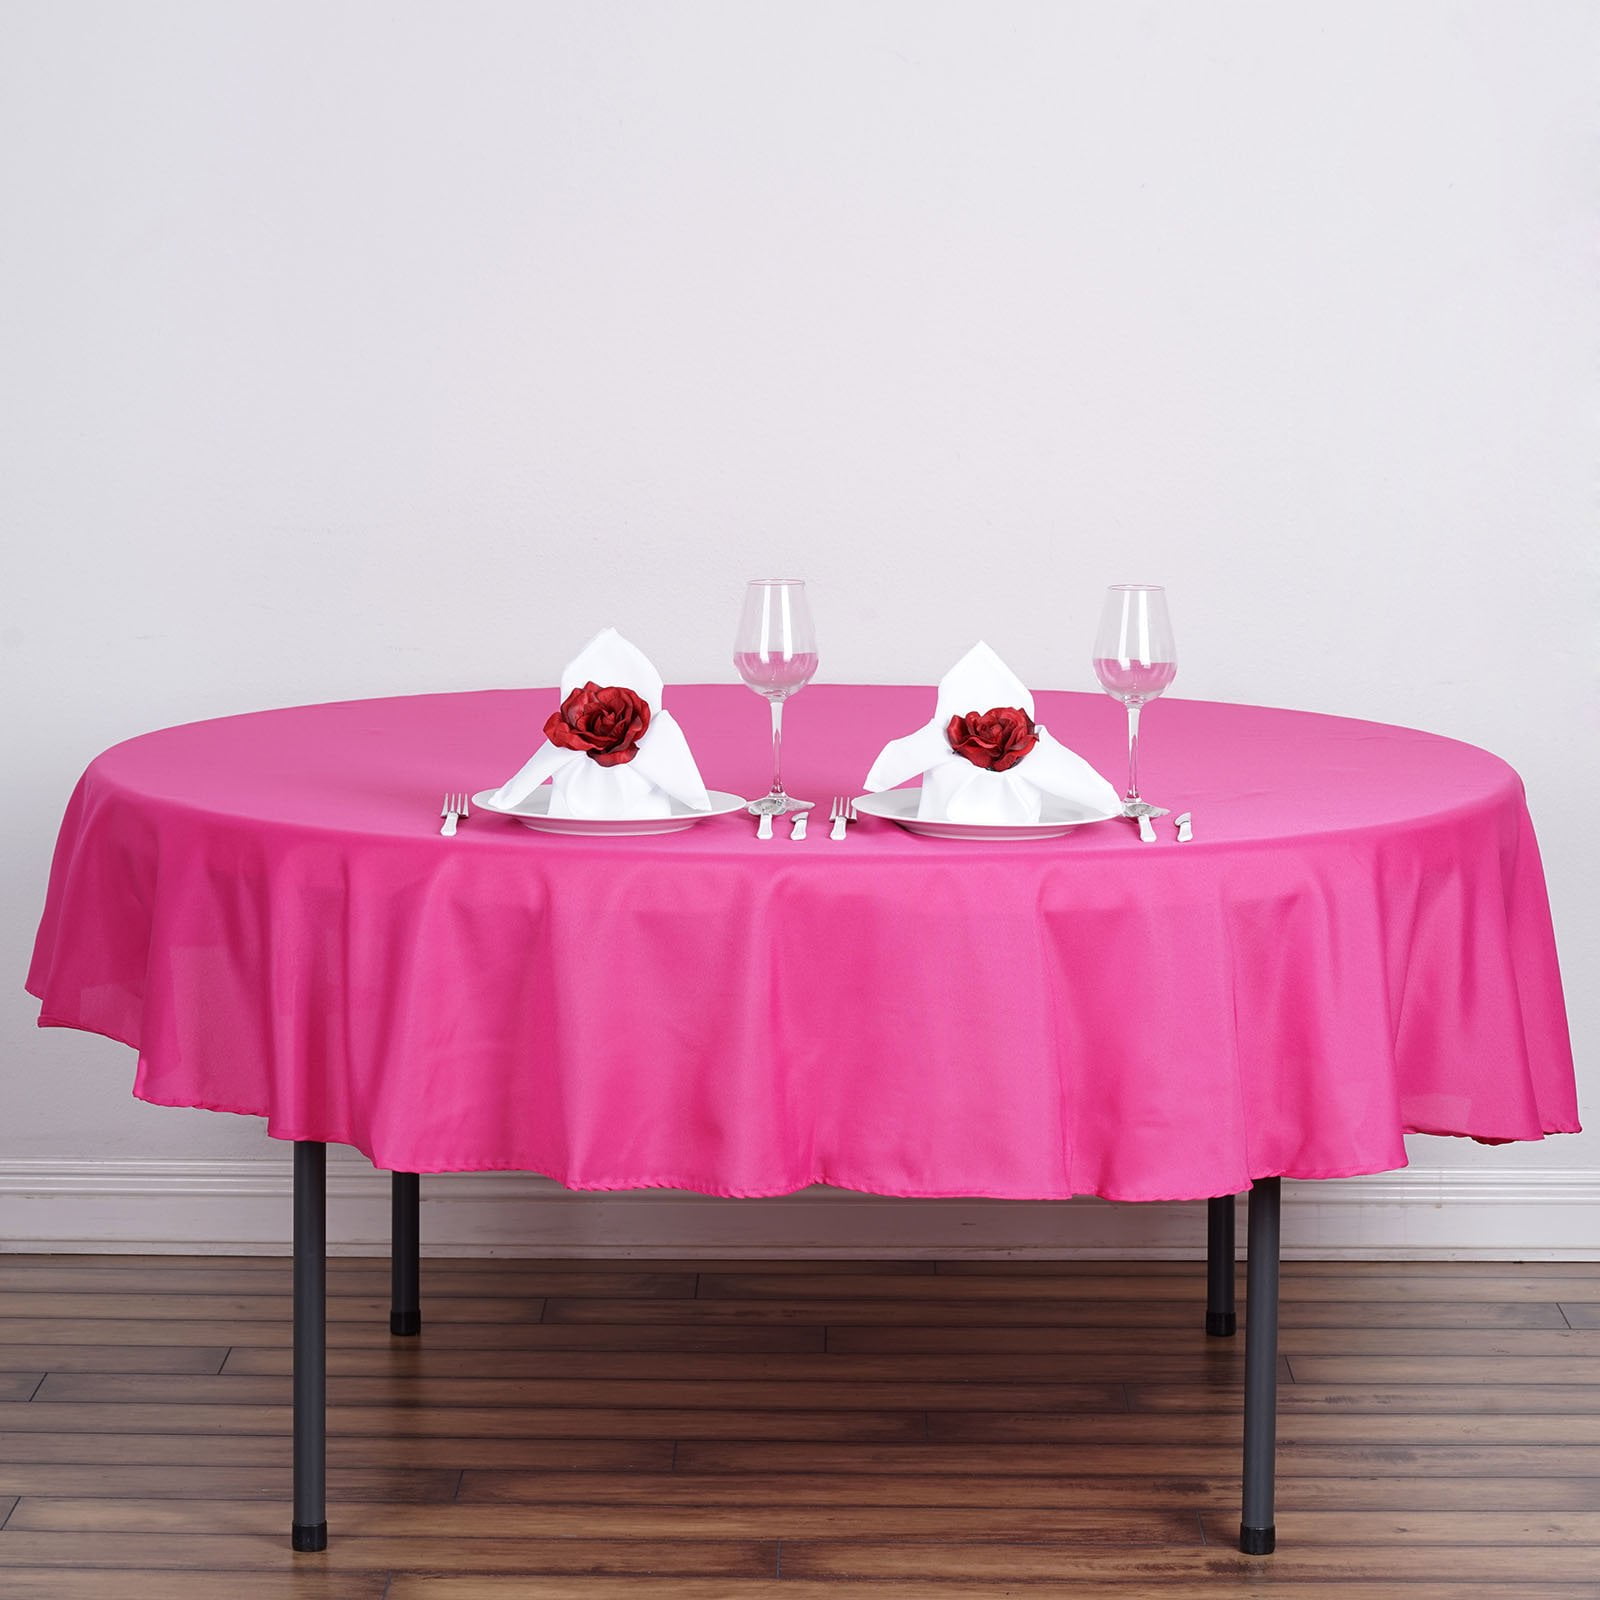 10 Dusty Rose 90/" ROUND POLYESTER TABLECLOTHS Wholesale Wedding Party Supplies